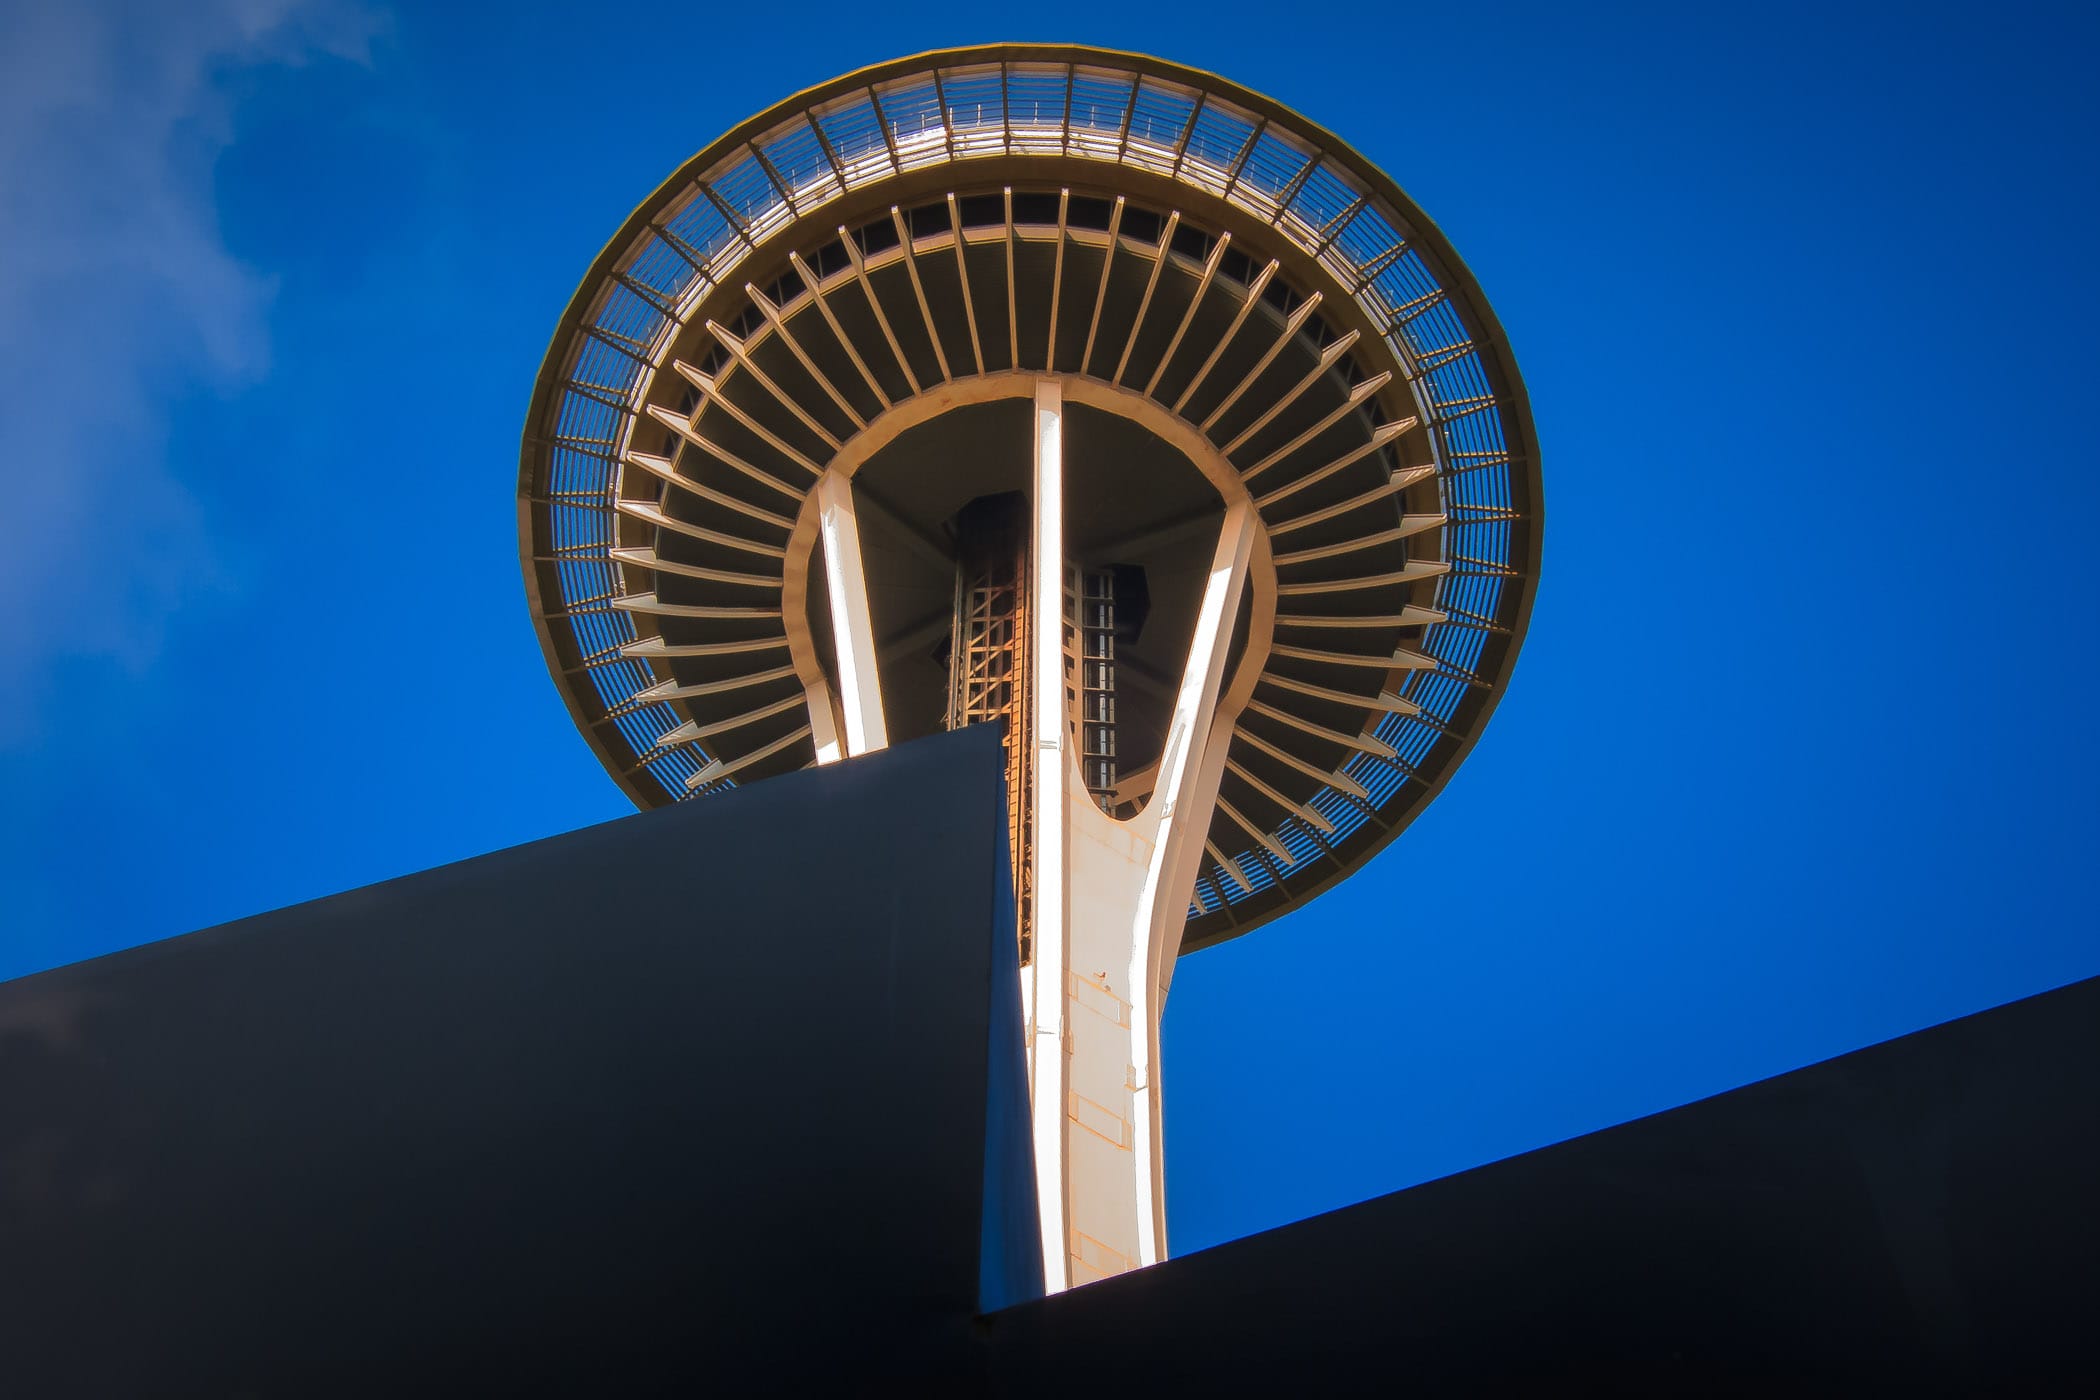 The iconic Space Needle rises into the clear blue sky over Seattle.